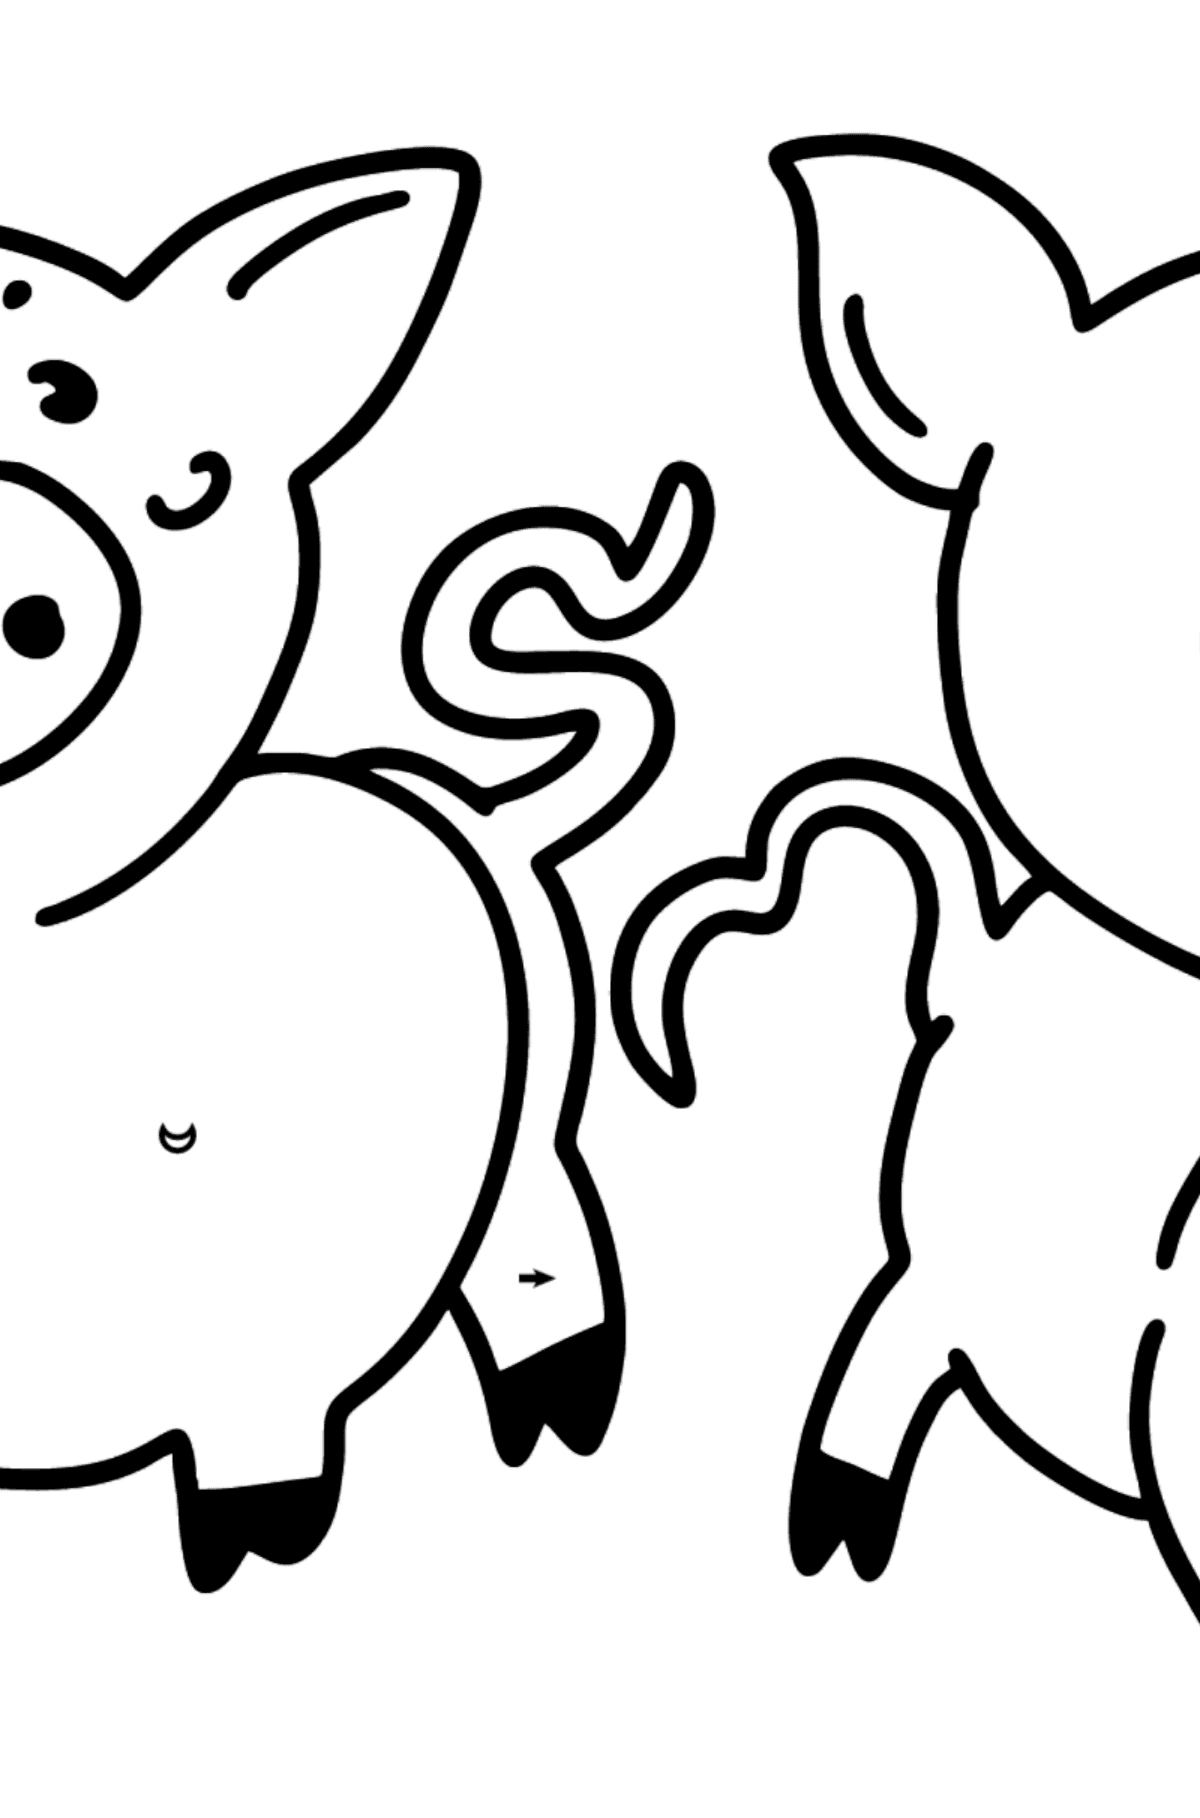 Piglets coloring page - Coloring by Symbols and Geometric Shapes for Kids